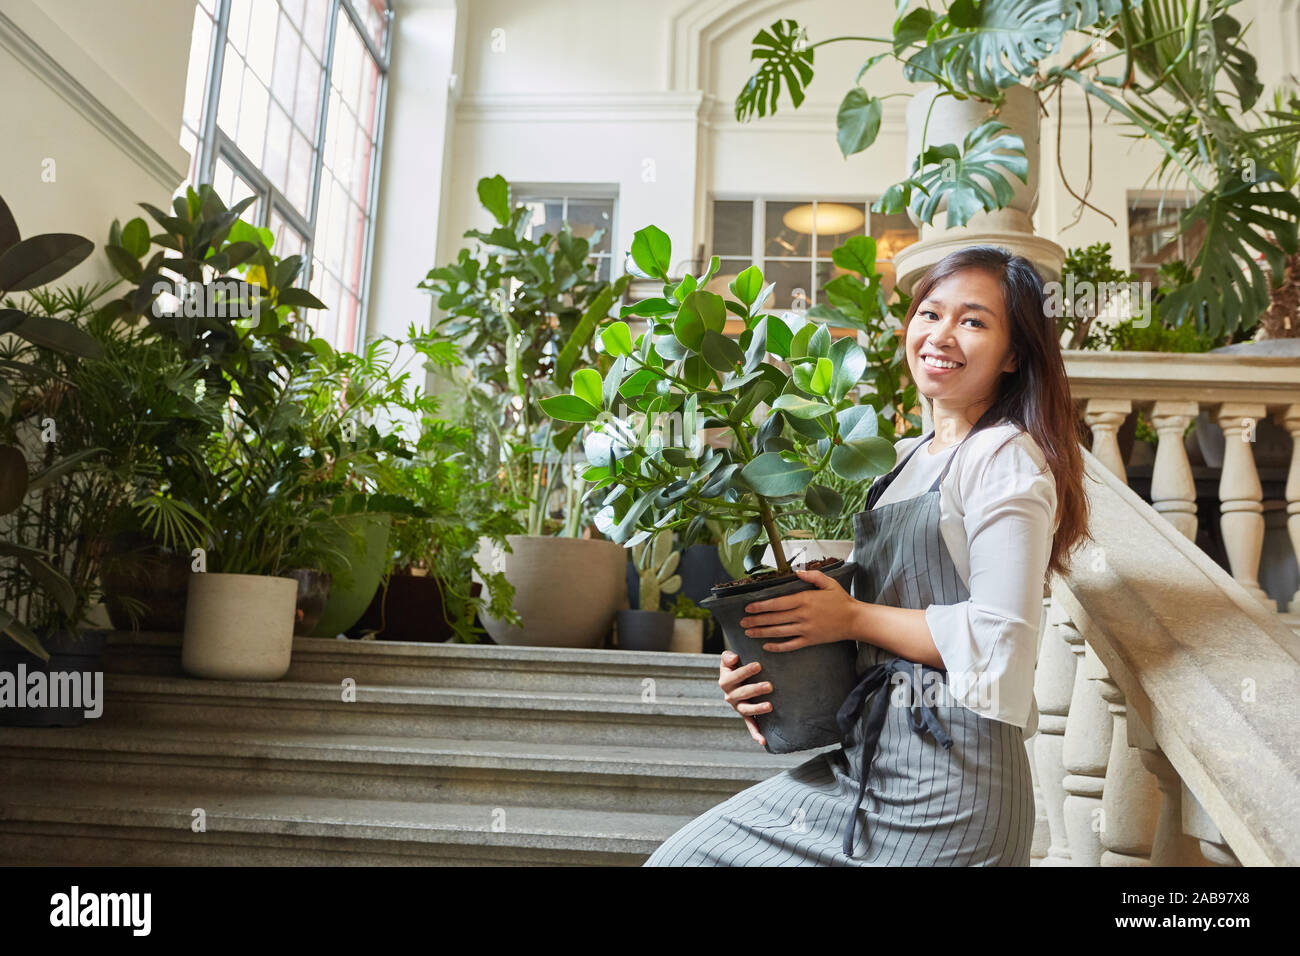 Florist of Event floristry with green plant while decorating on stairs Stock Photo